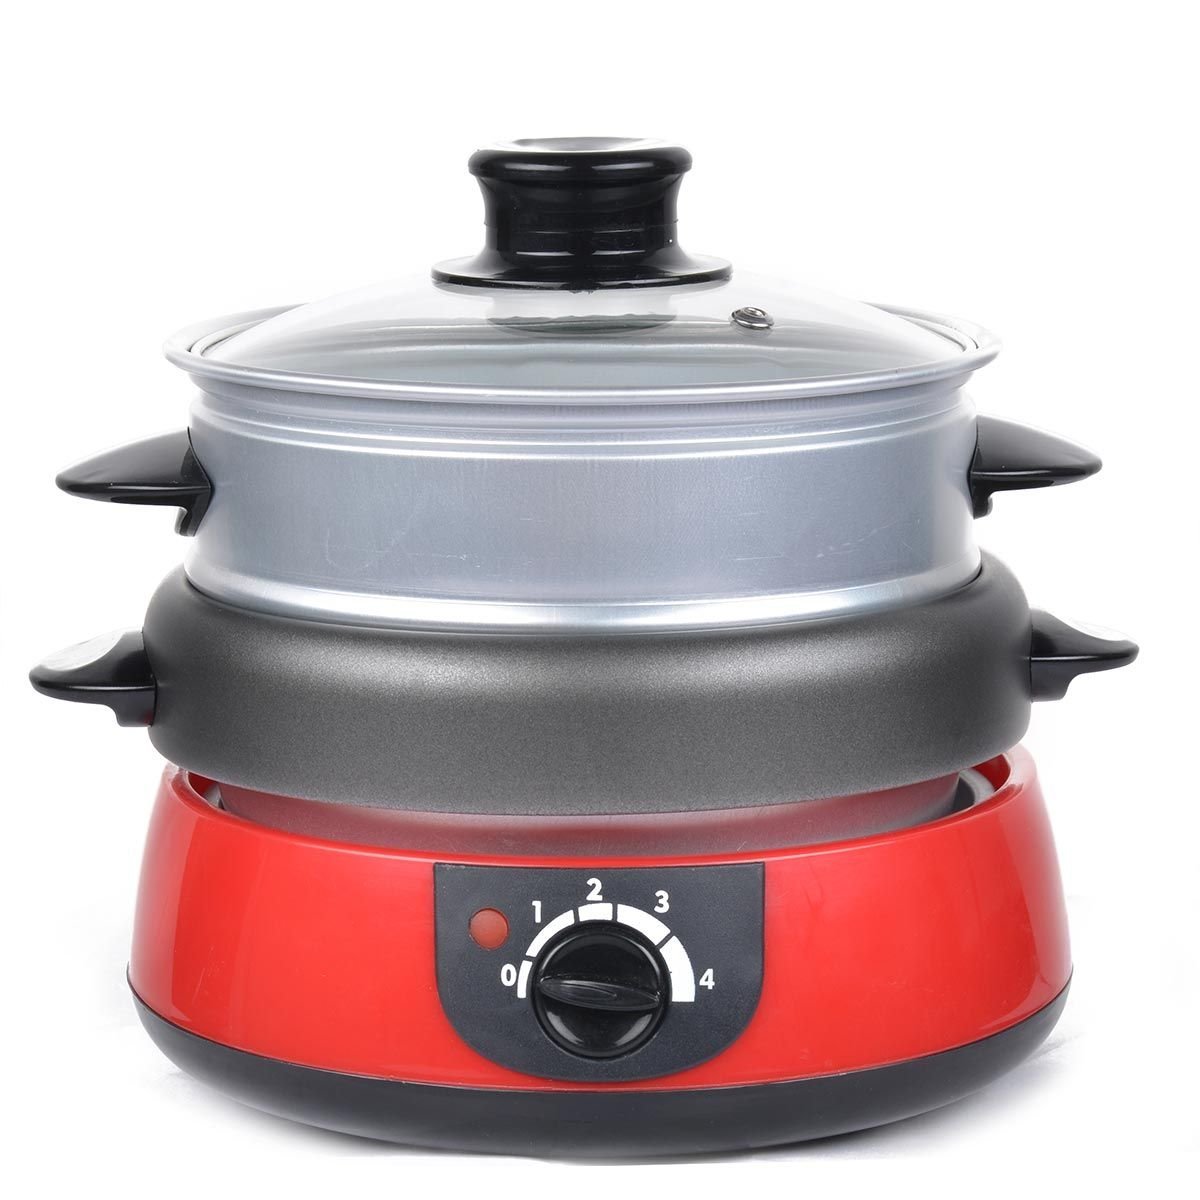 5 in 1 Multifunction Electric Cooker